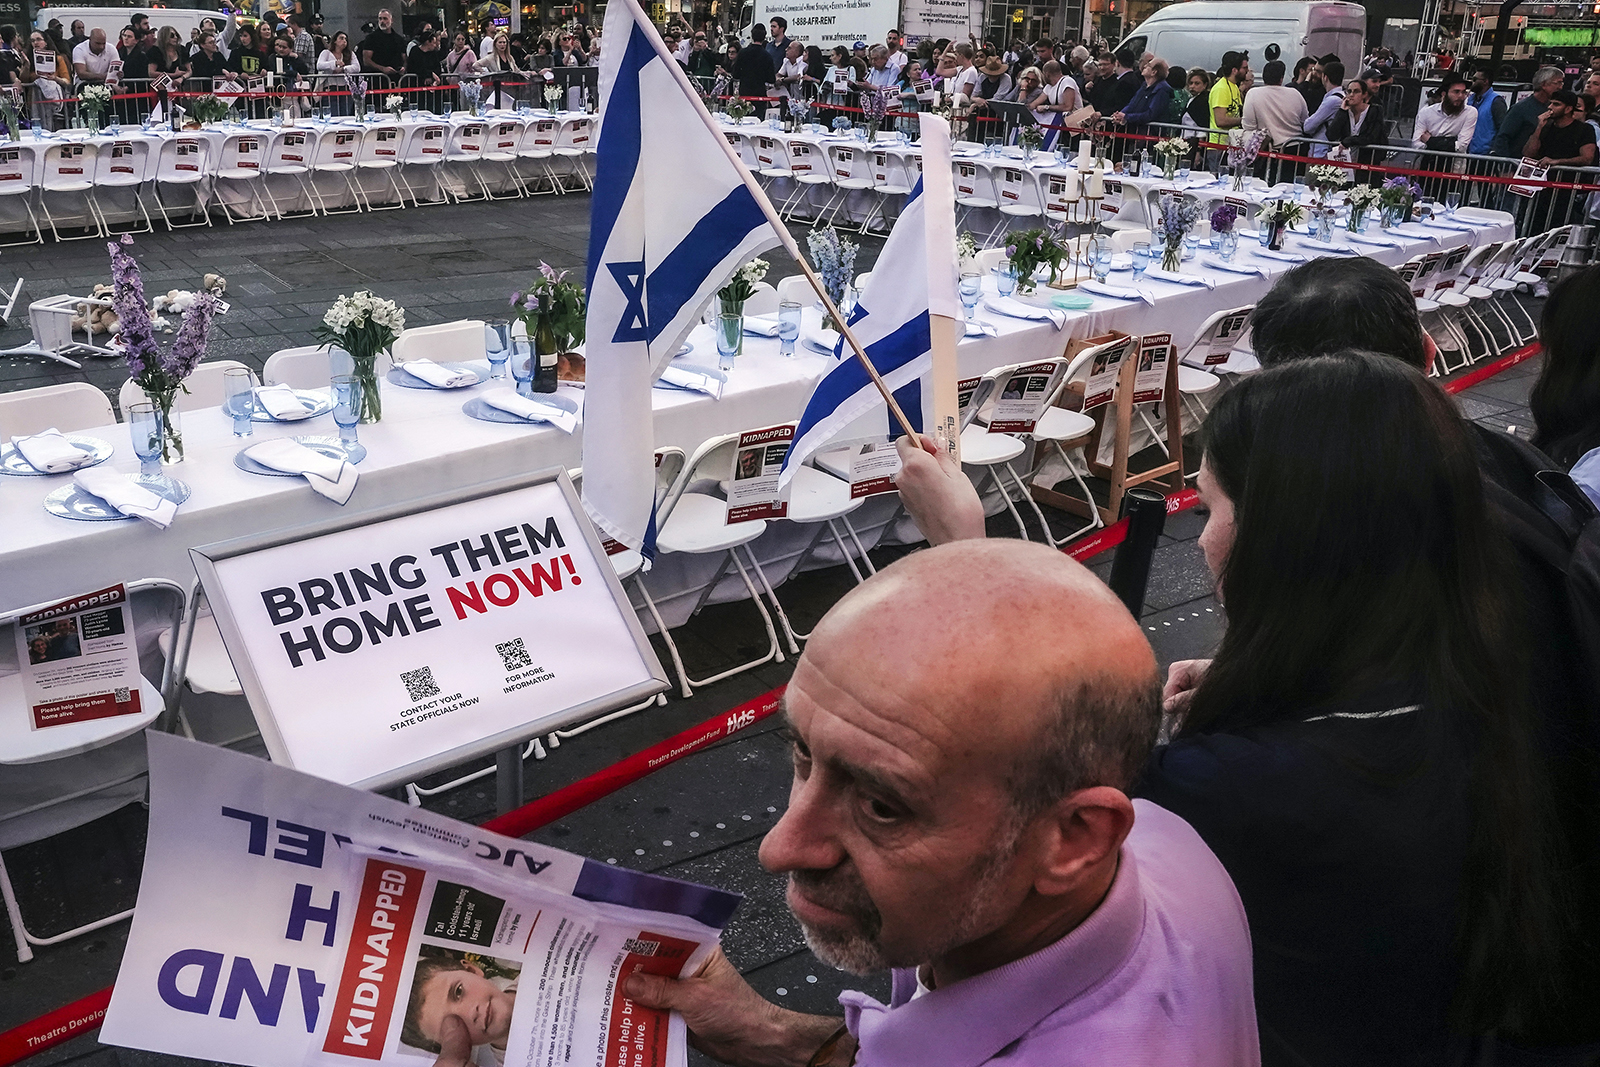 Israeli Americans and supporters hold displays of kidnapped individuals, calling for their return, as they gather around an installation in Times Square featuring a 222-seat Shabbat (Sabbath) table set, a symbolic representation of hostages still held captive by Hamas in the Gaza Strip, Thursday, Oct. 26, 2023, in New York. (AP Photo/Bebeto Matthews)